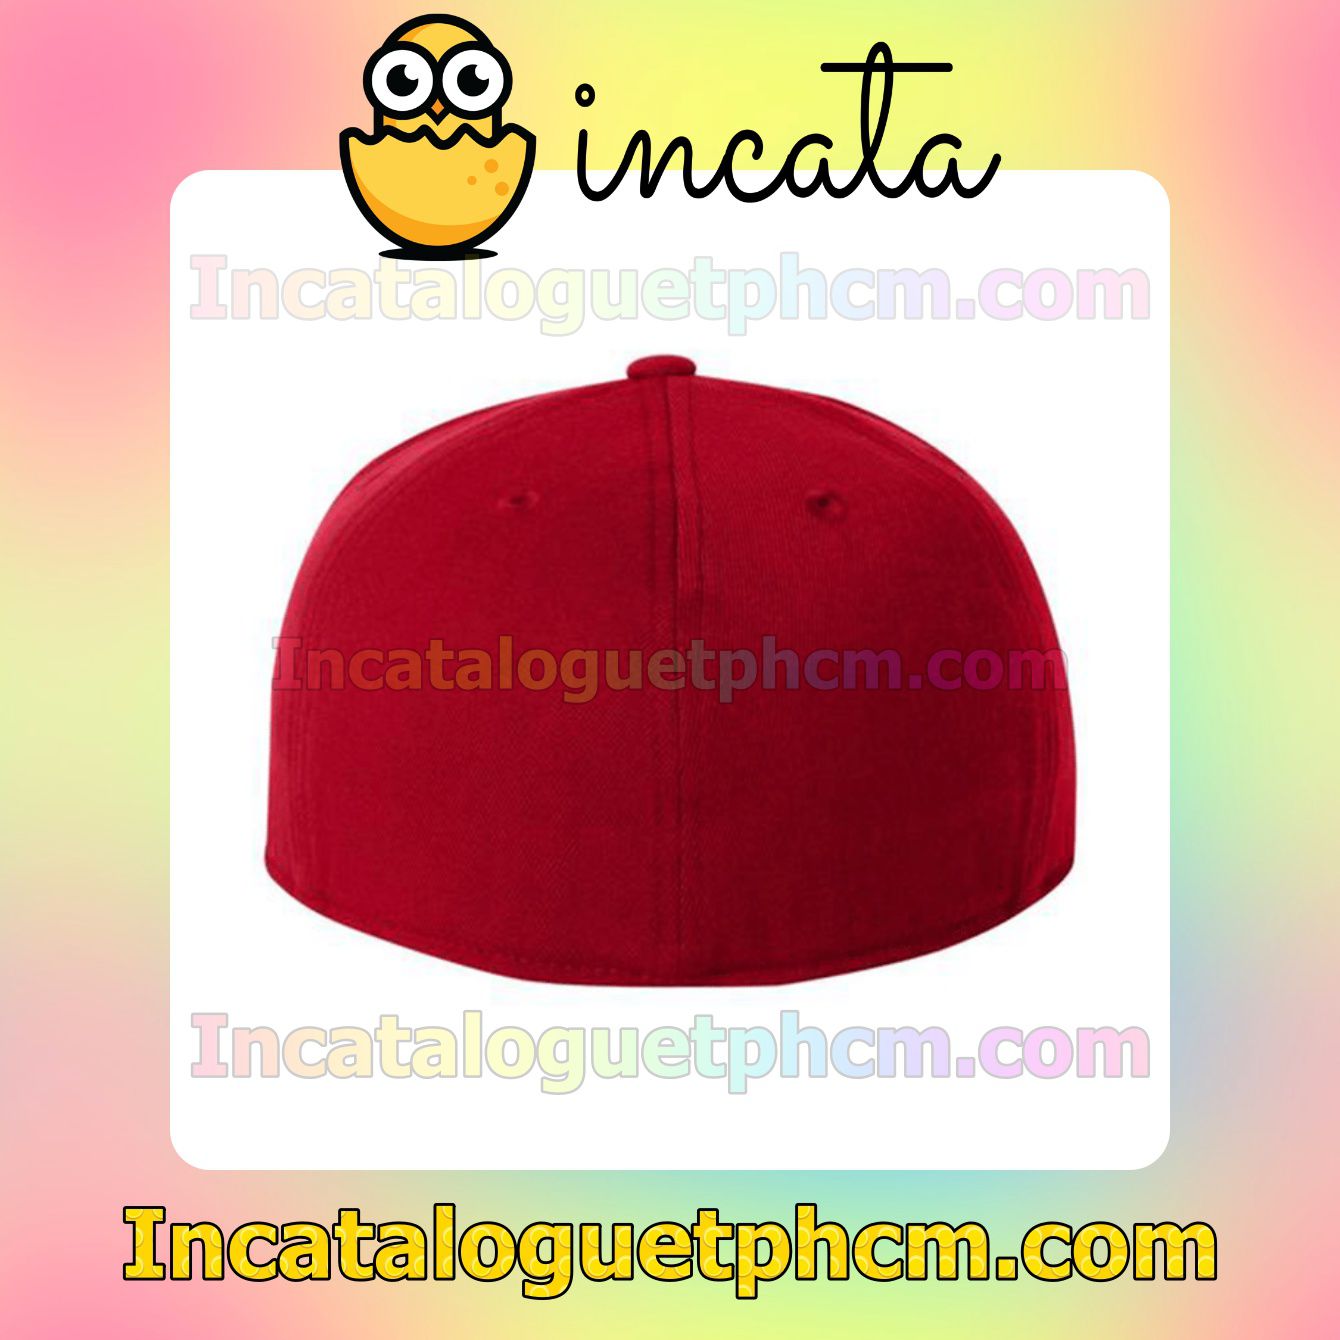 Sale Off Chicano Style Red Classic Hat Caps Gift For Men